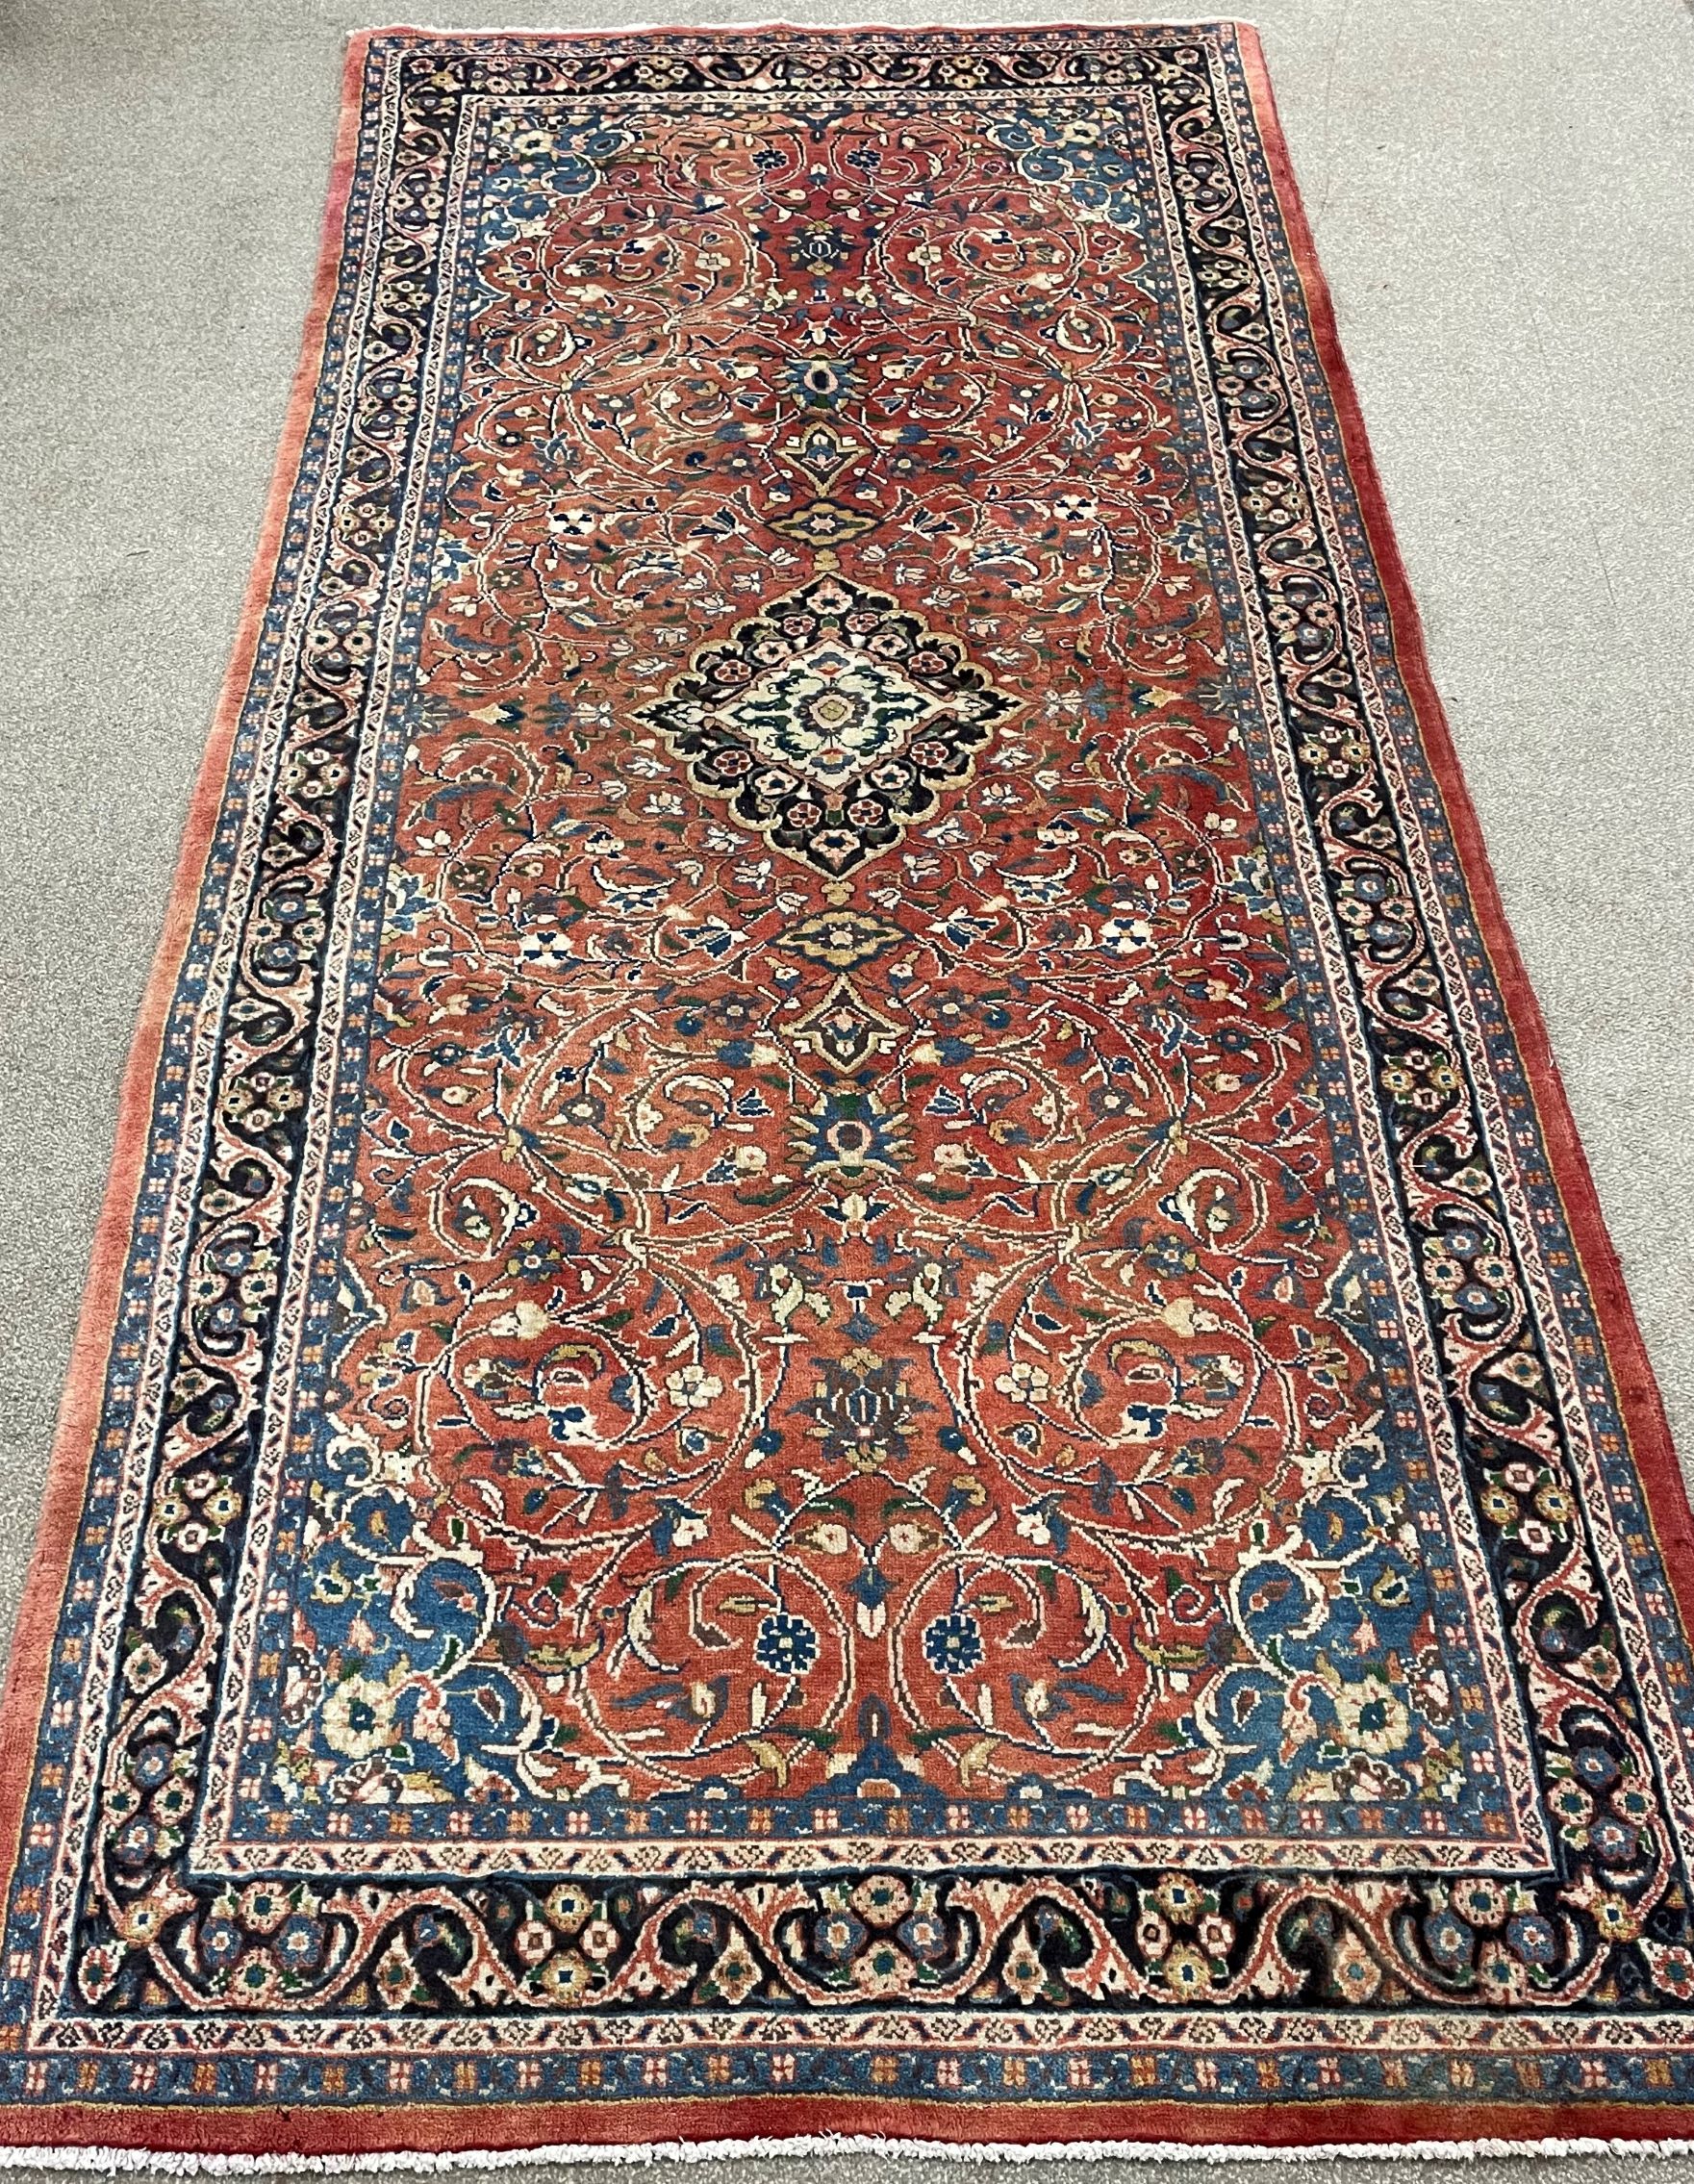 Washed red ground full pile Persian Sarouk runner with floral medallion 340cm by 160cm - Image 4 of 6